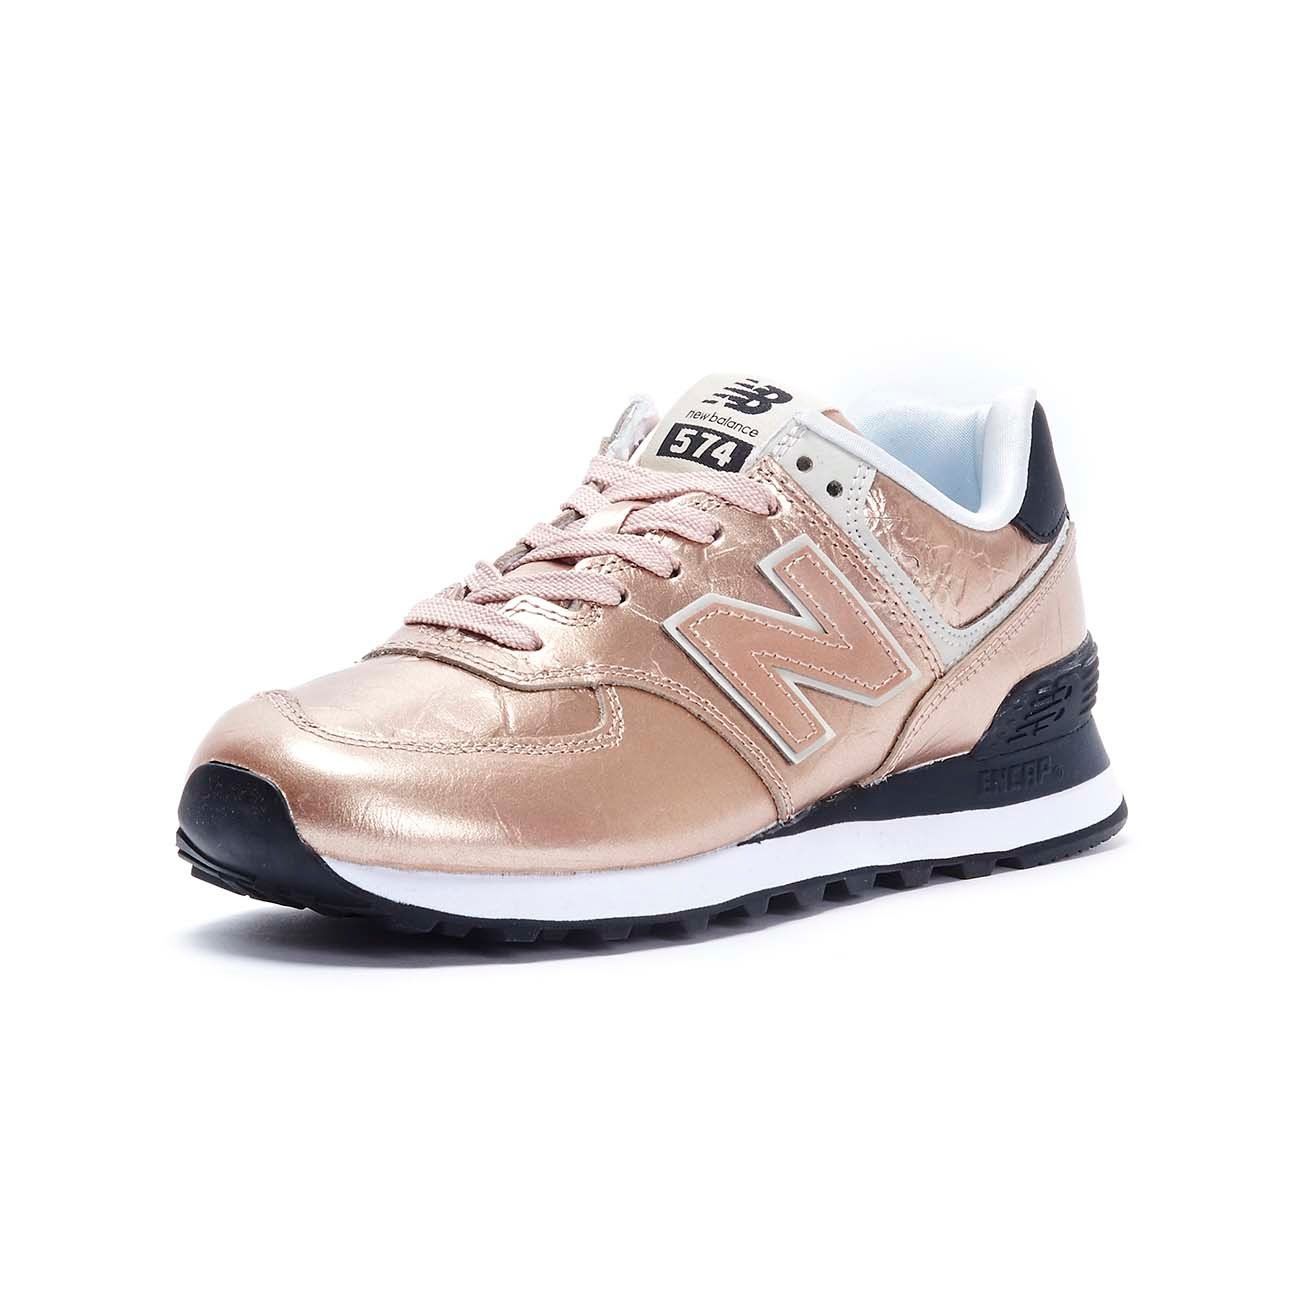 NEW BALANCE SNEAKERS 574 LIFESTYLE METALLIC LEATHER Donna Rose ...